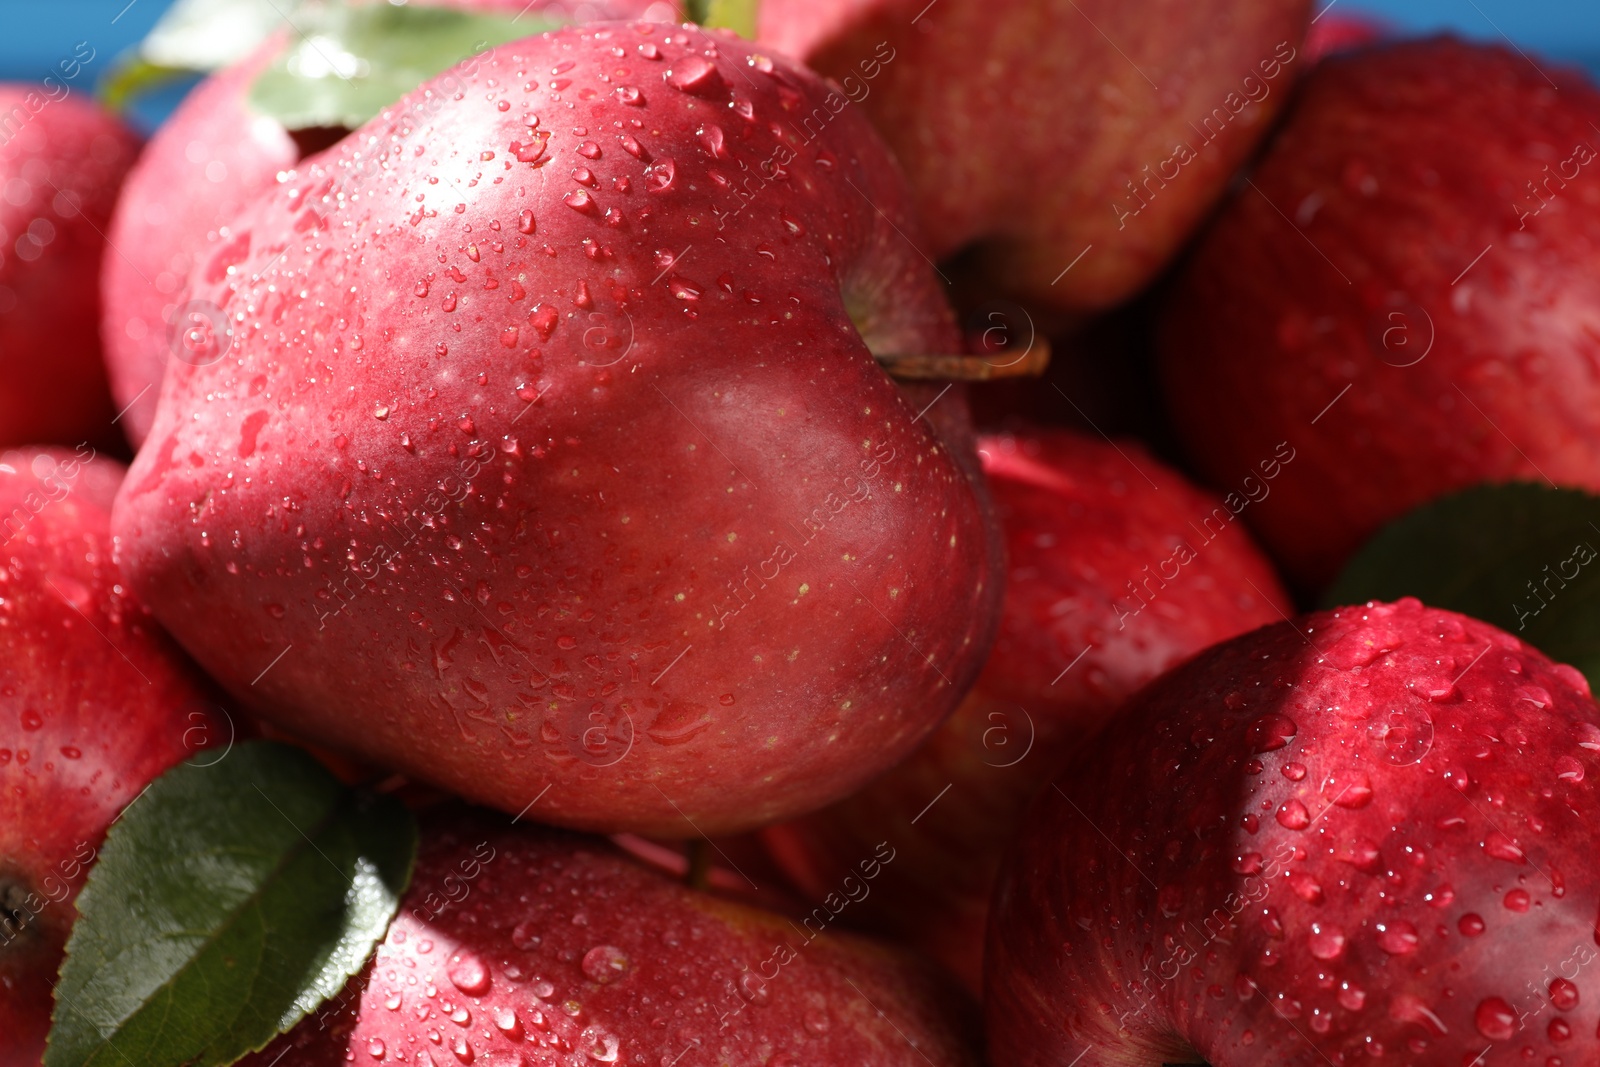 Photo of Ripe red apples with water drops and green leaves as background, closeup